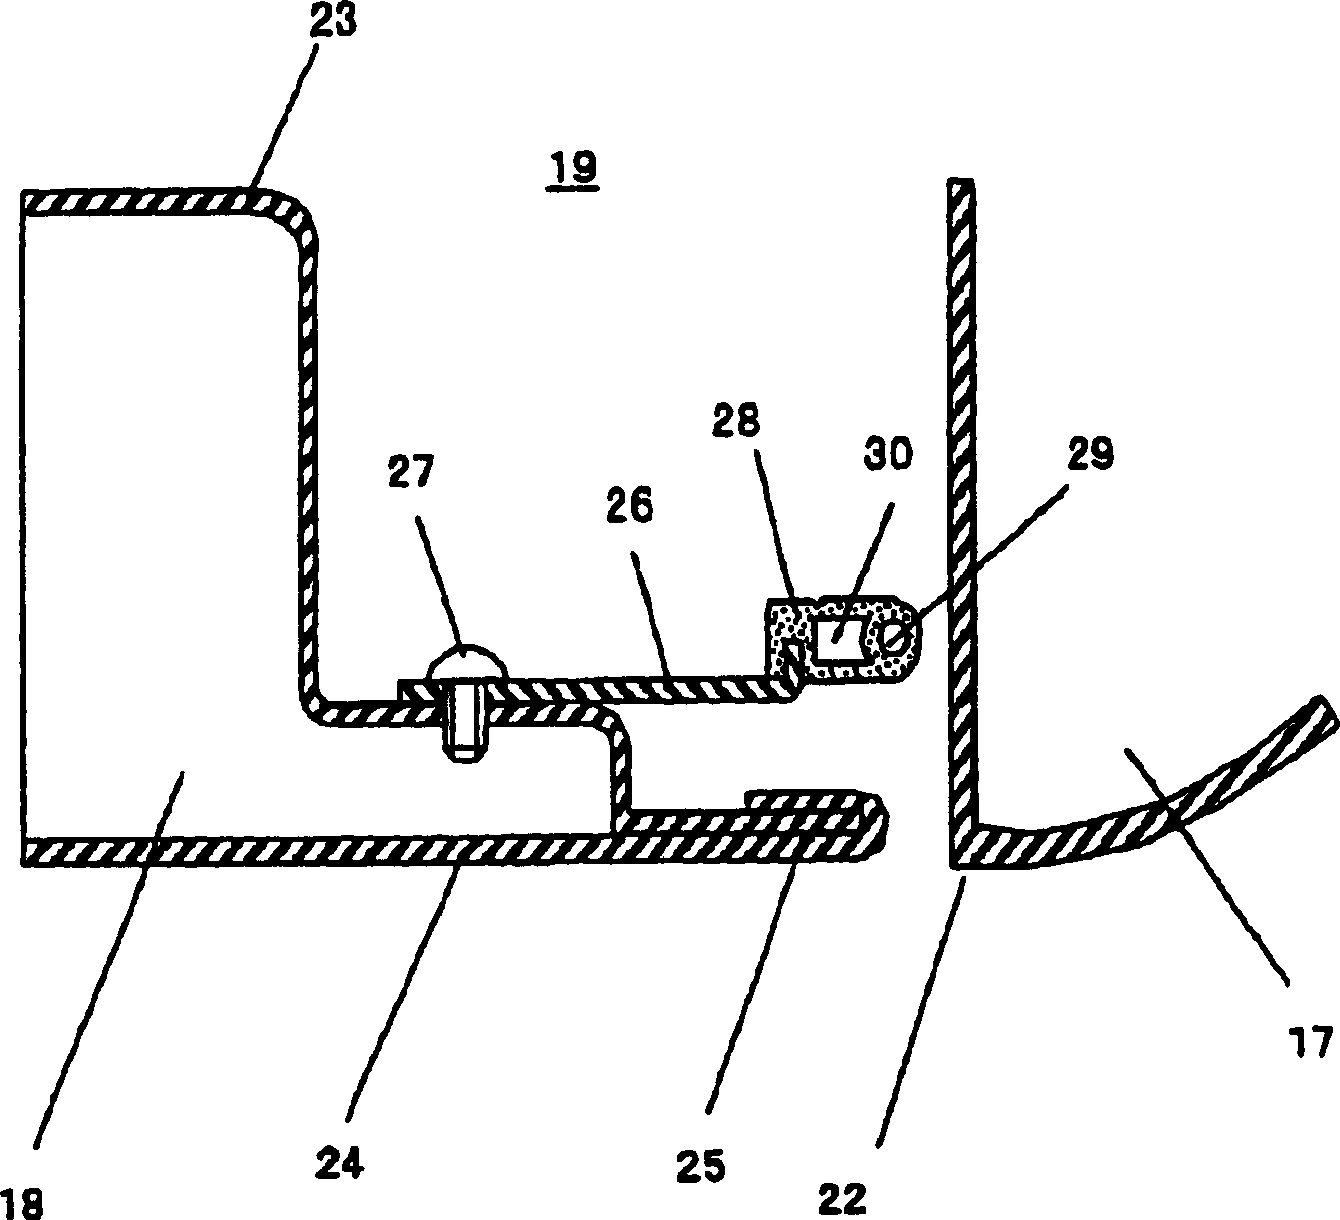 Mover opening/closing control device